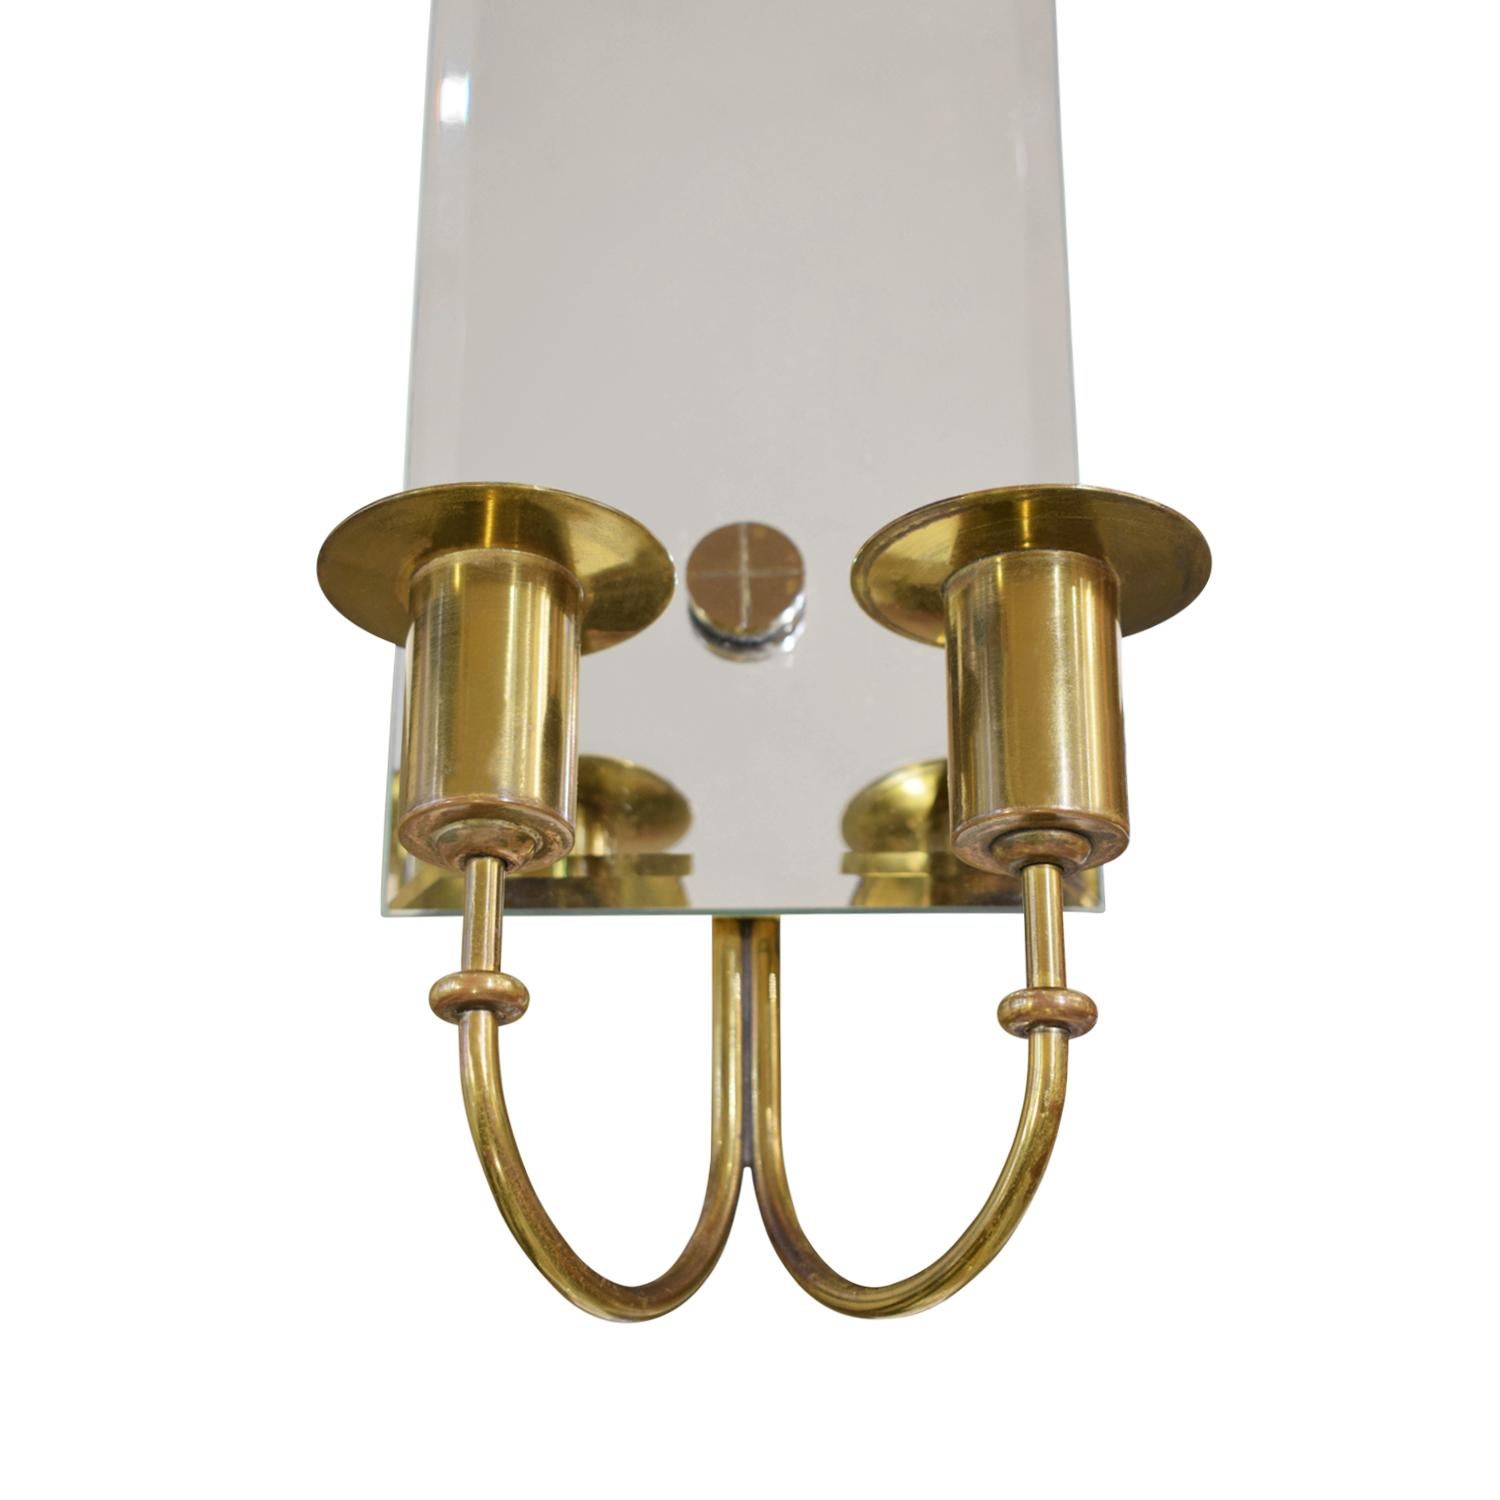 Tommi Parzinger Pair of Mirrored Sconces with Brass Candleholders, 1950s (Abgeschrägt)